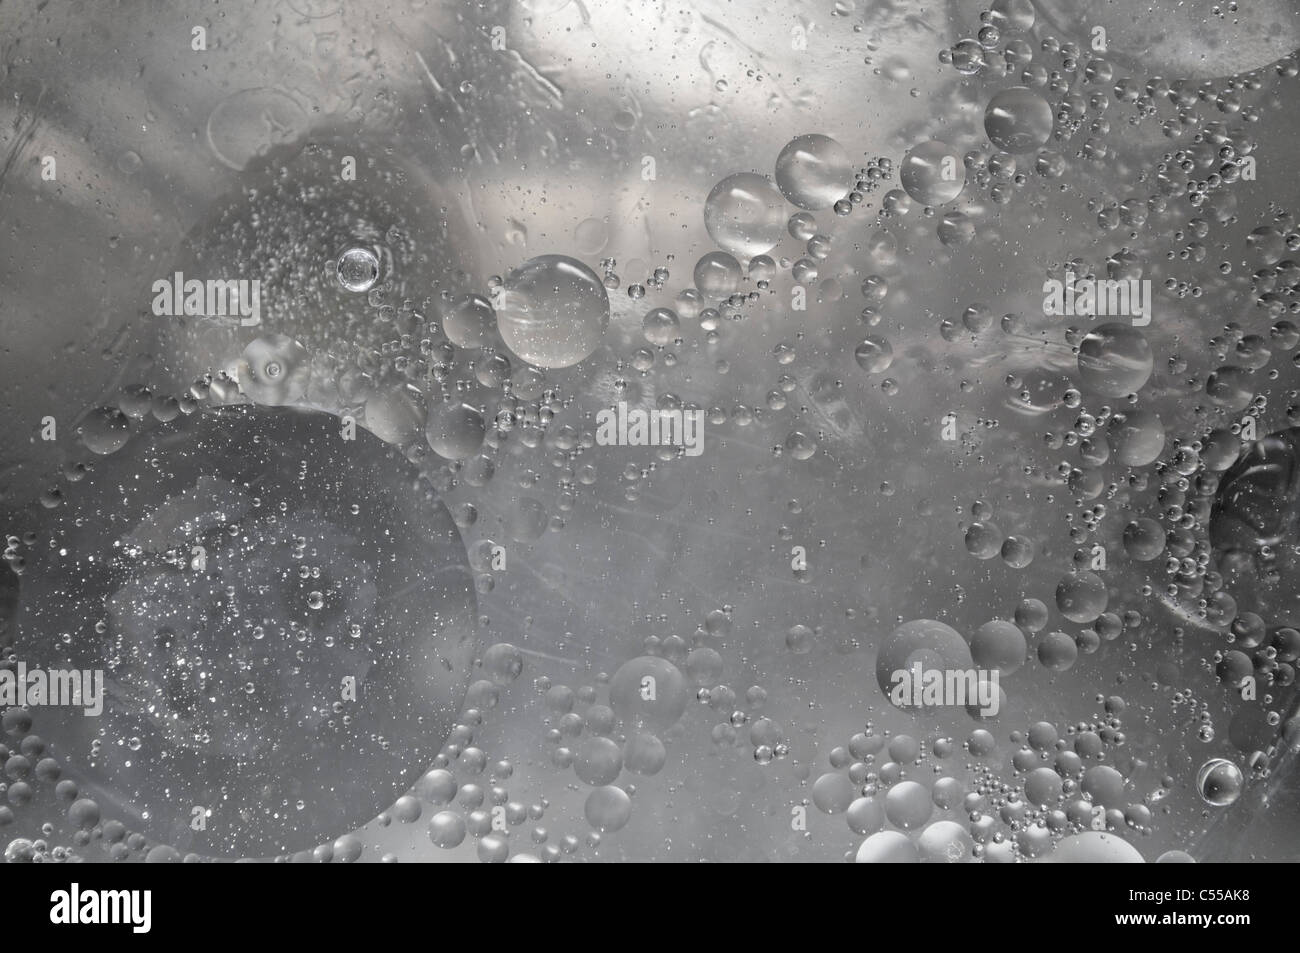 Almost colorless bubbles and drops randomly distributed in body of liquid Stock Photo